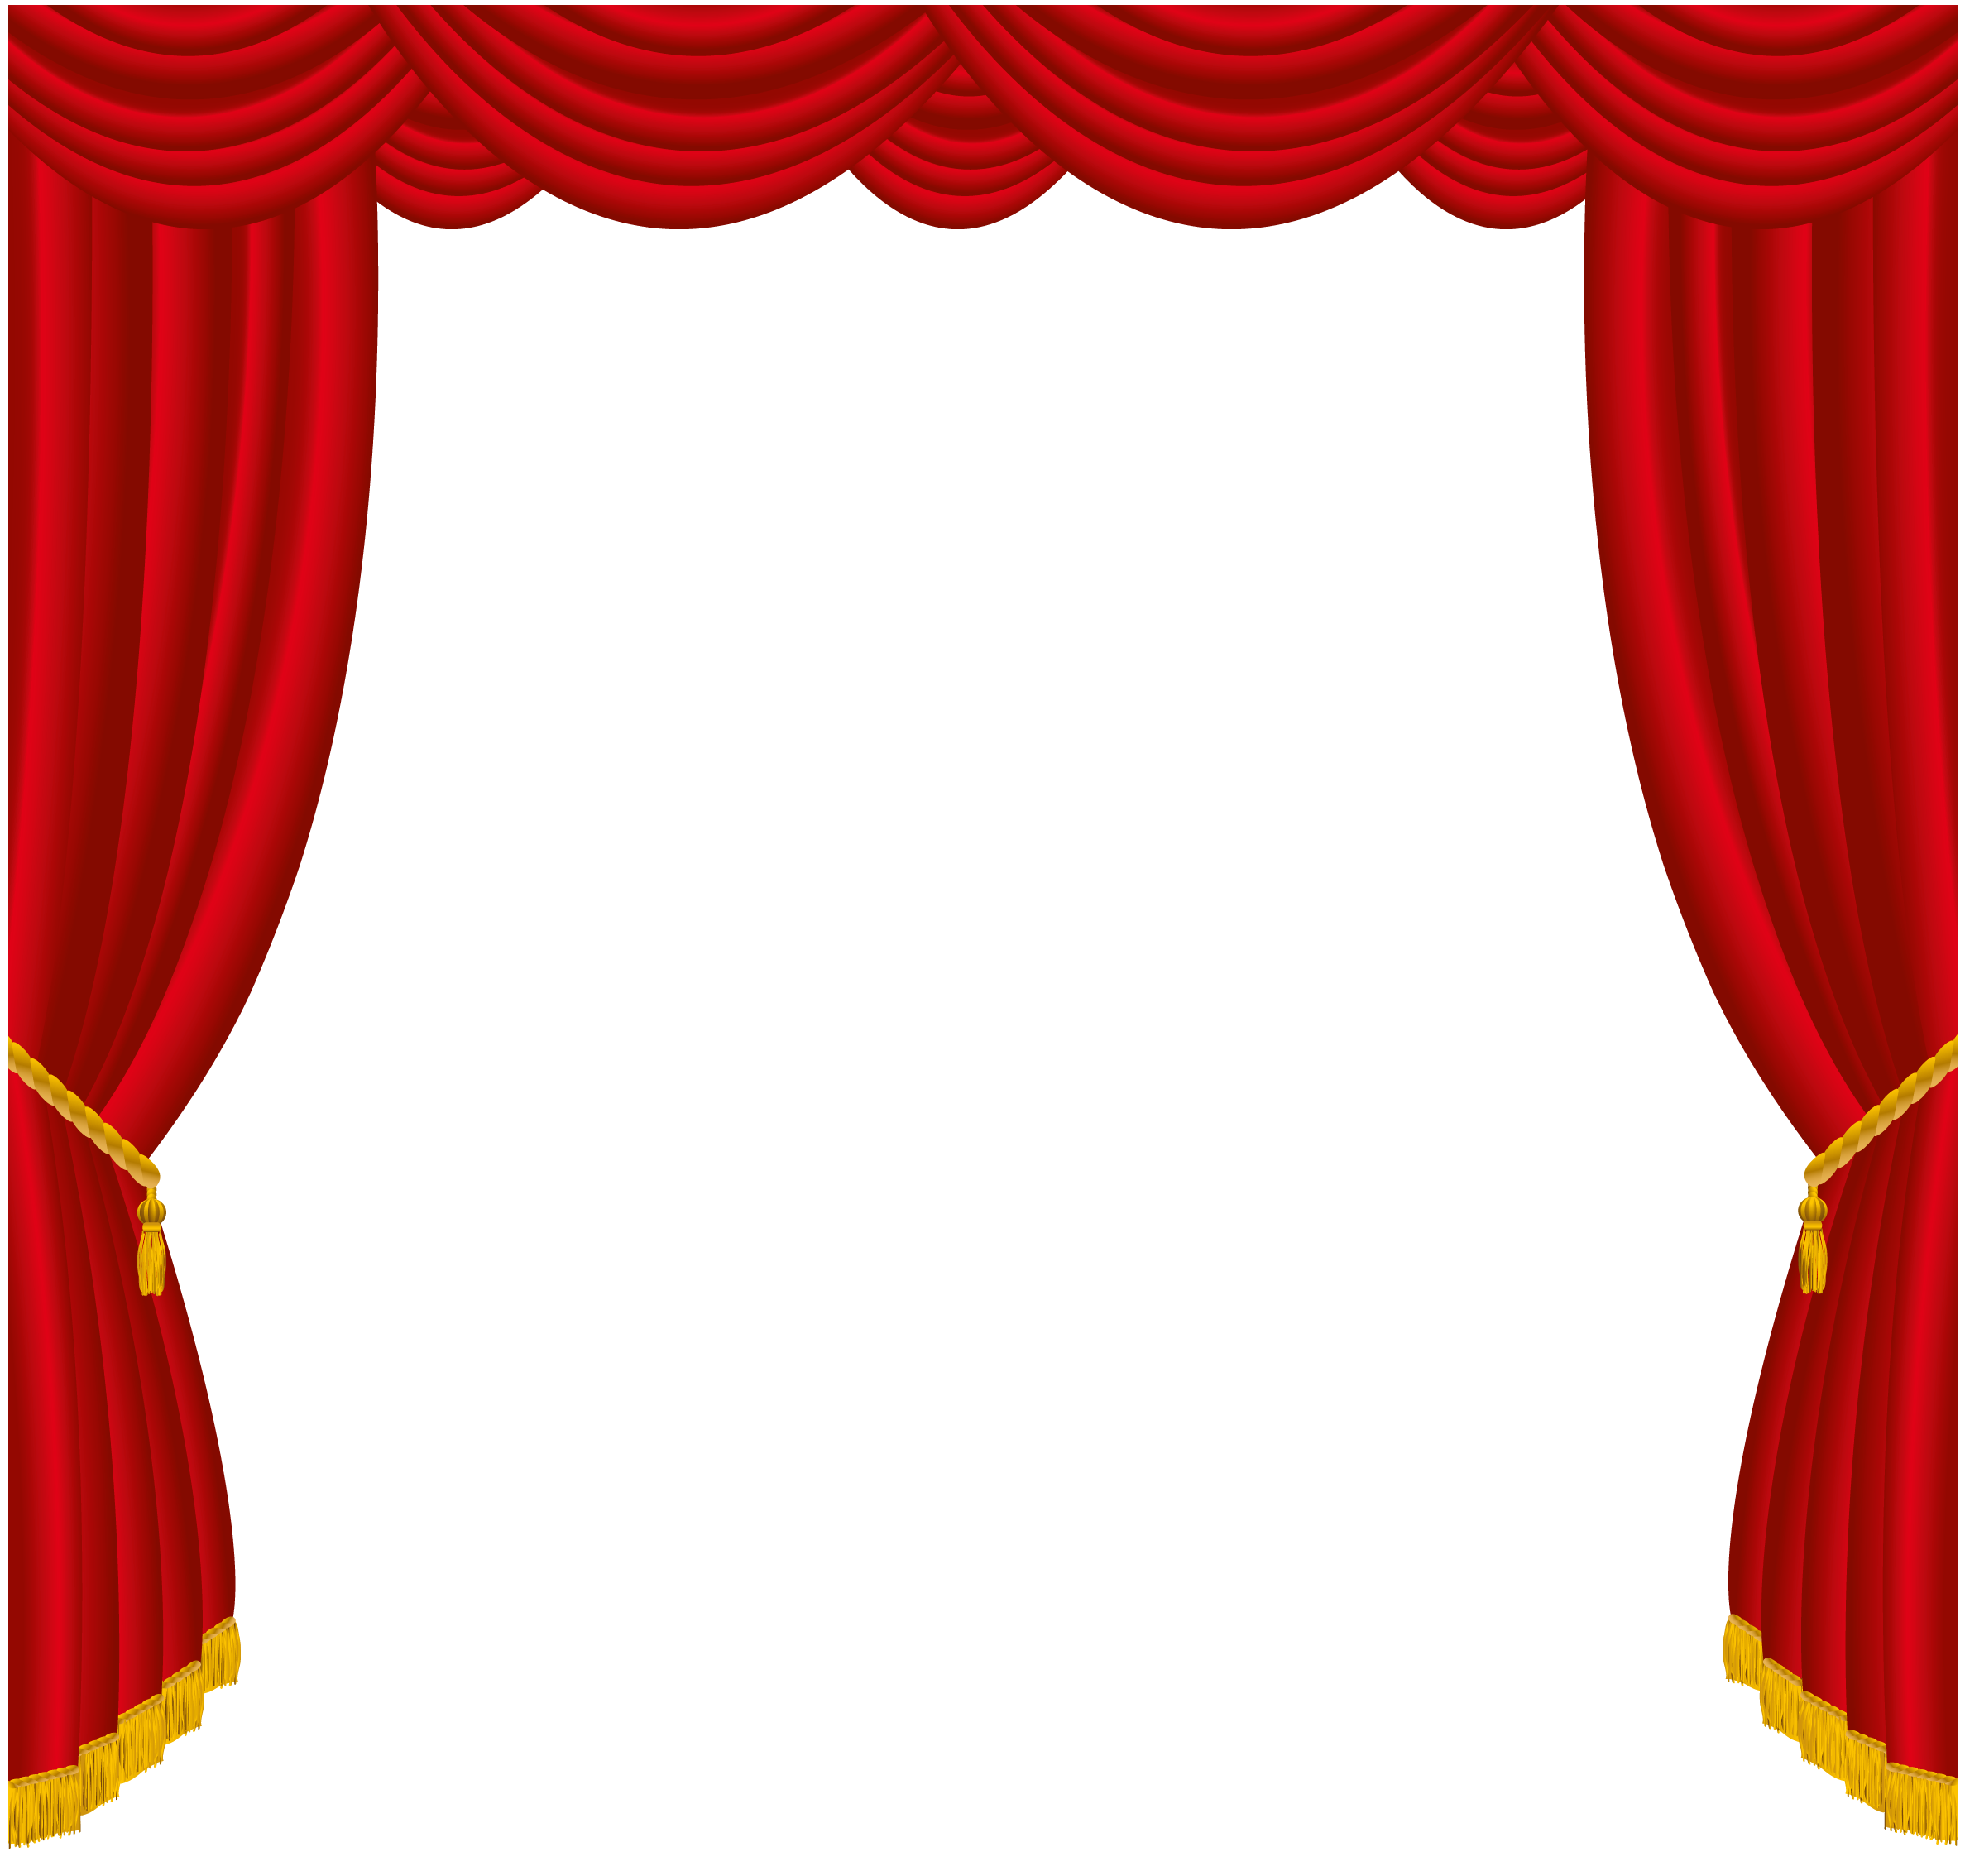 Red curtain clipart 